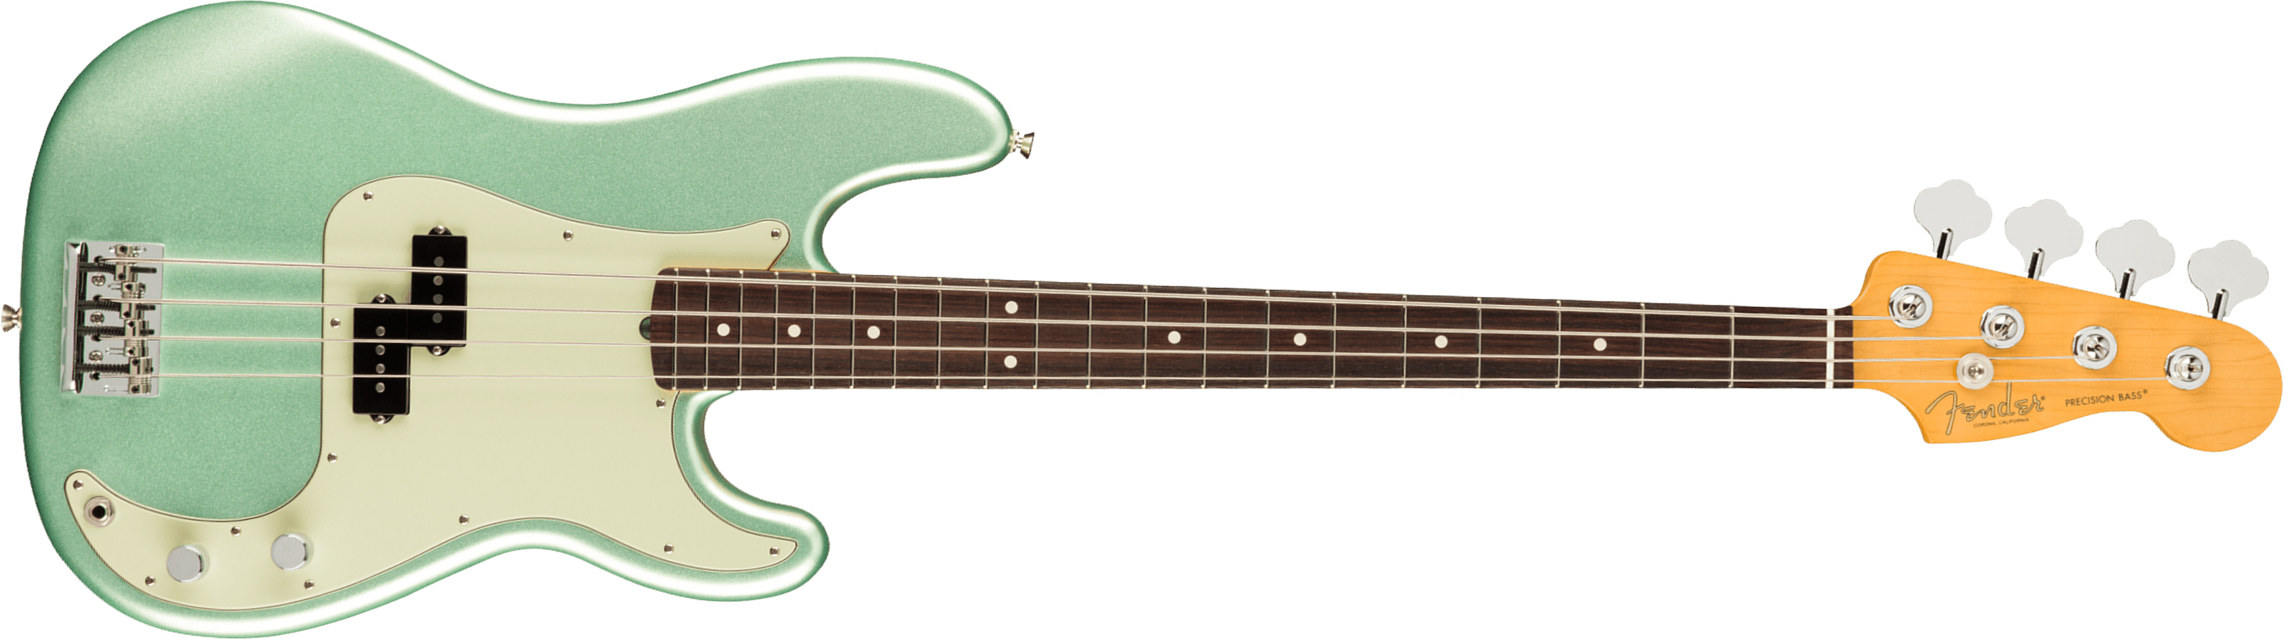 Fender Precision Bass American Professional Ii Usa Rw - Mystic Surf Green - Solid body electric bass - Main picture